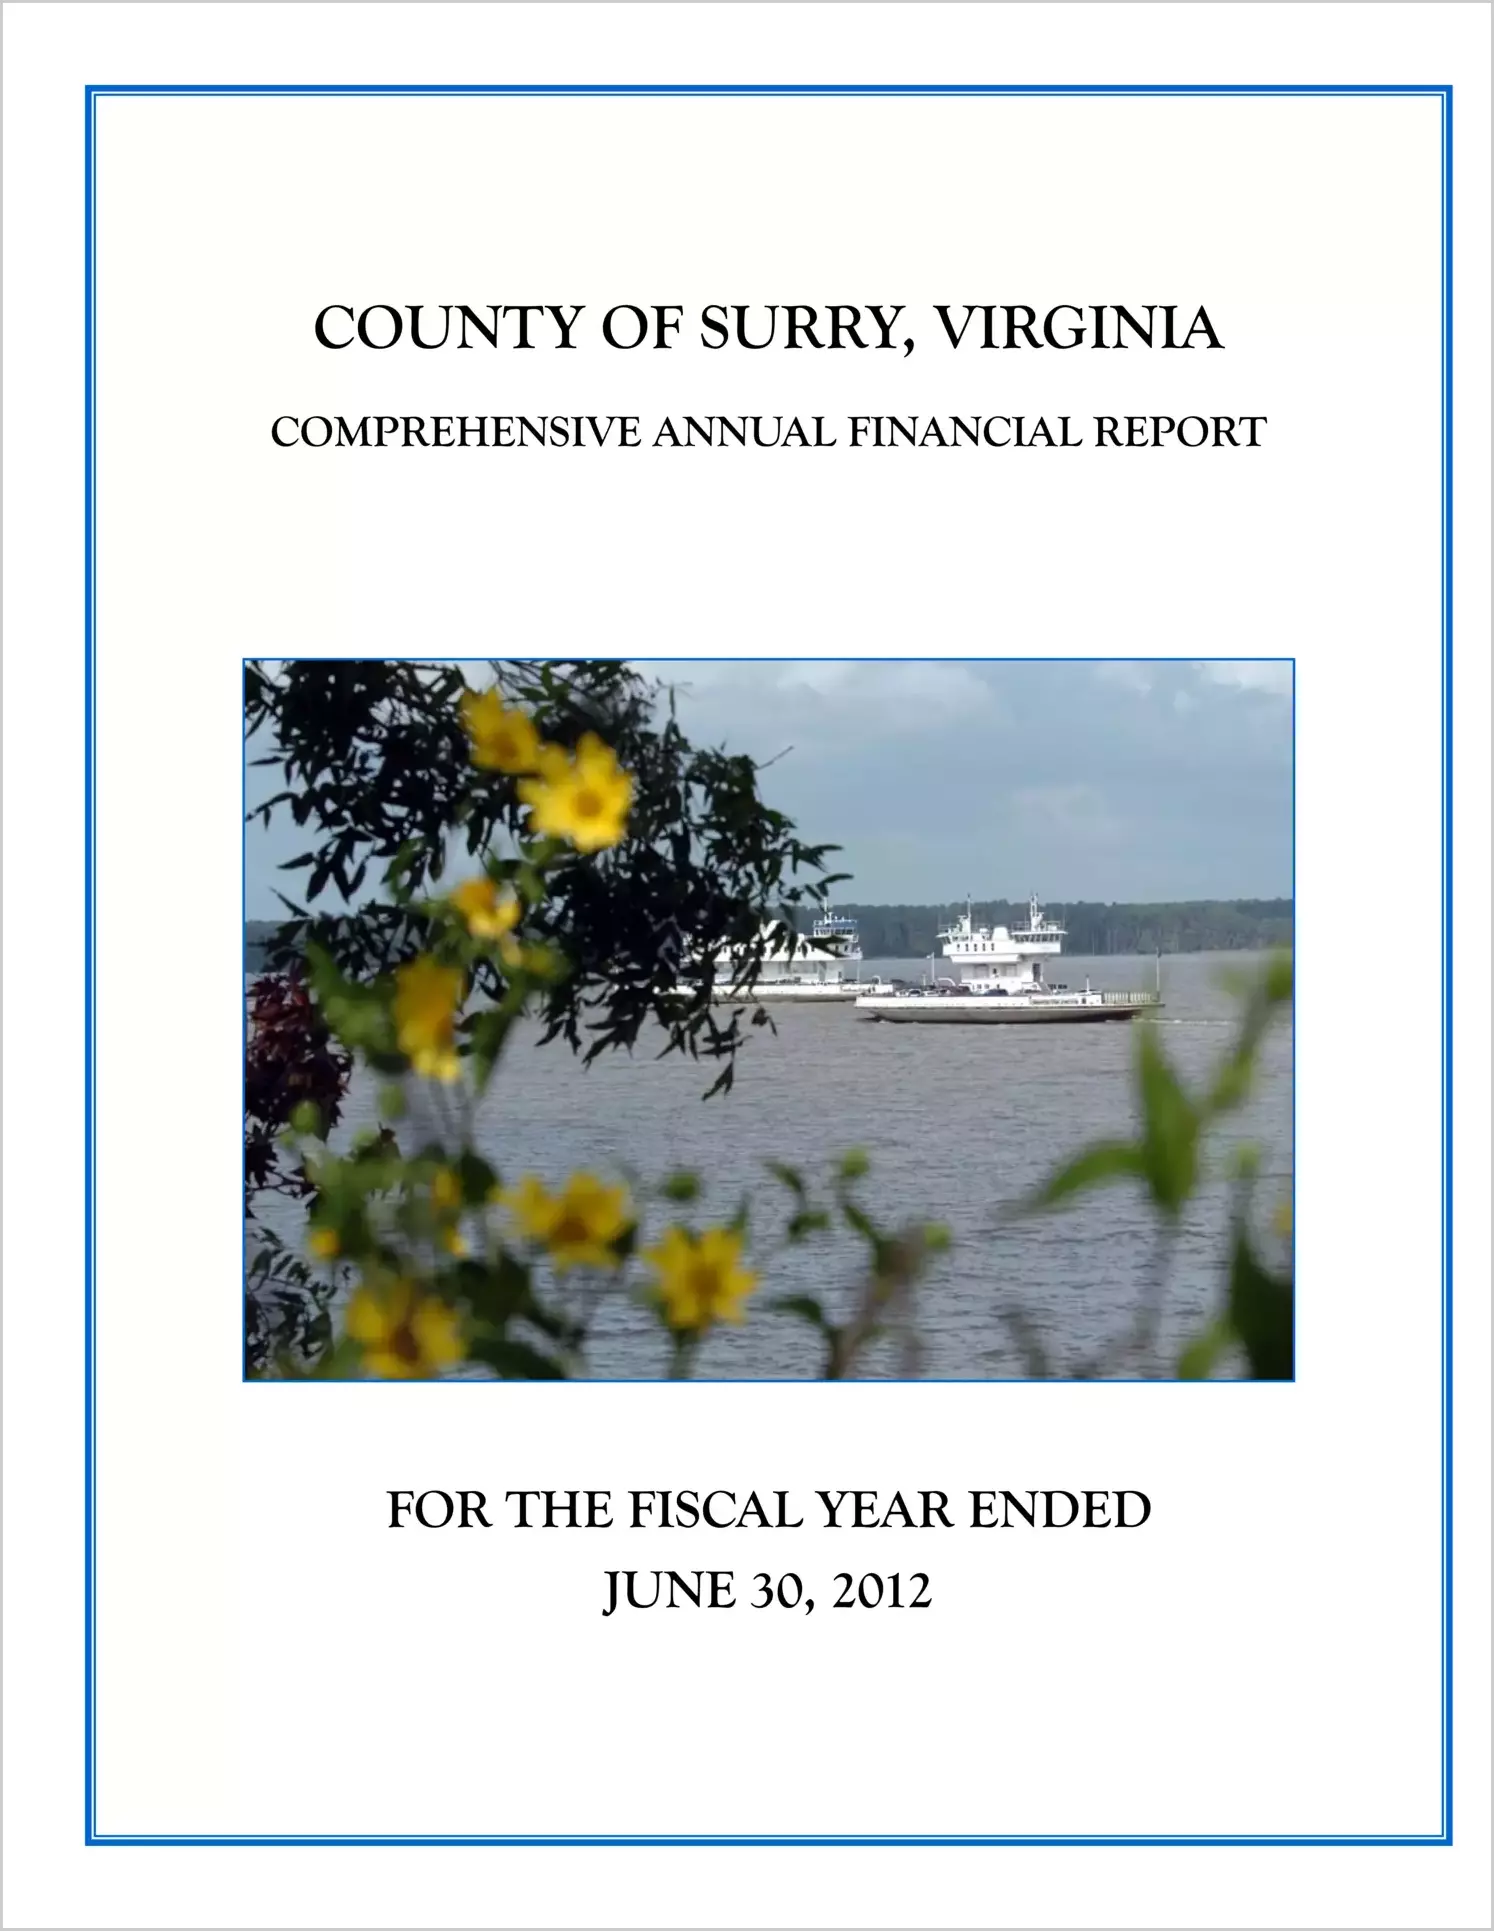 2012 Annual Financial Report for County of Surry